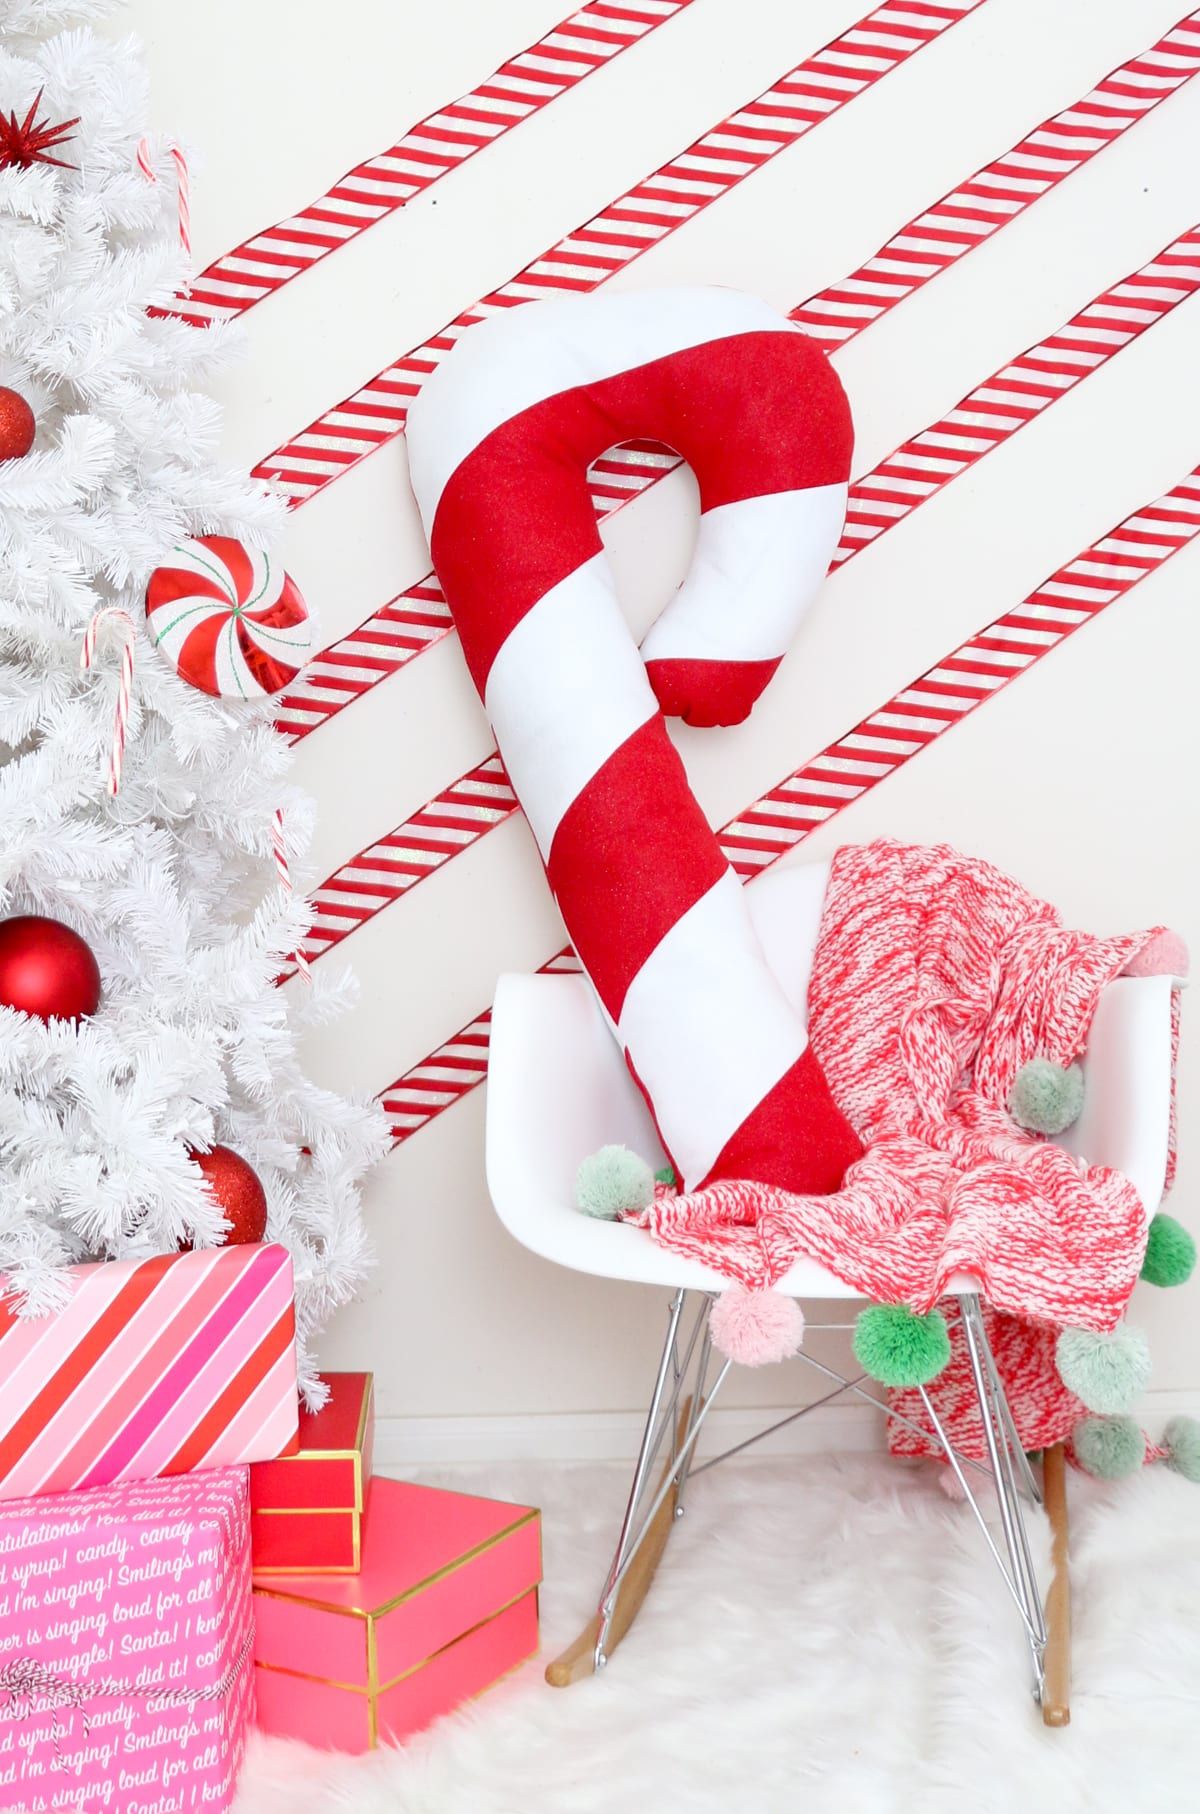 25 Candy Cane Crafts - DIY Candy Cane Decorations